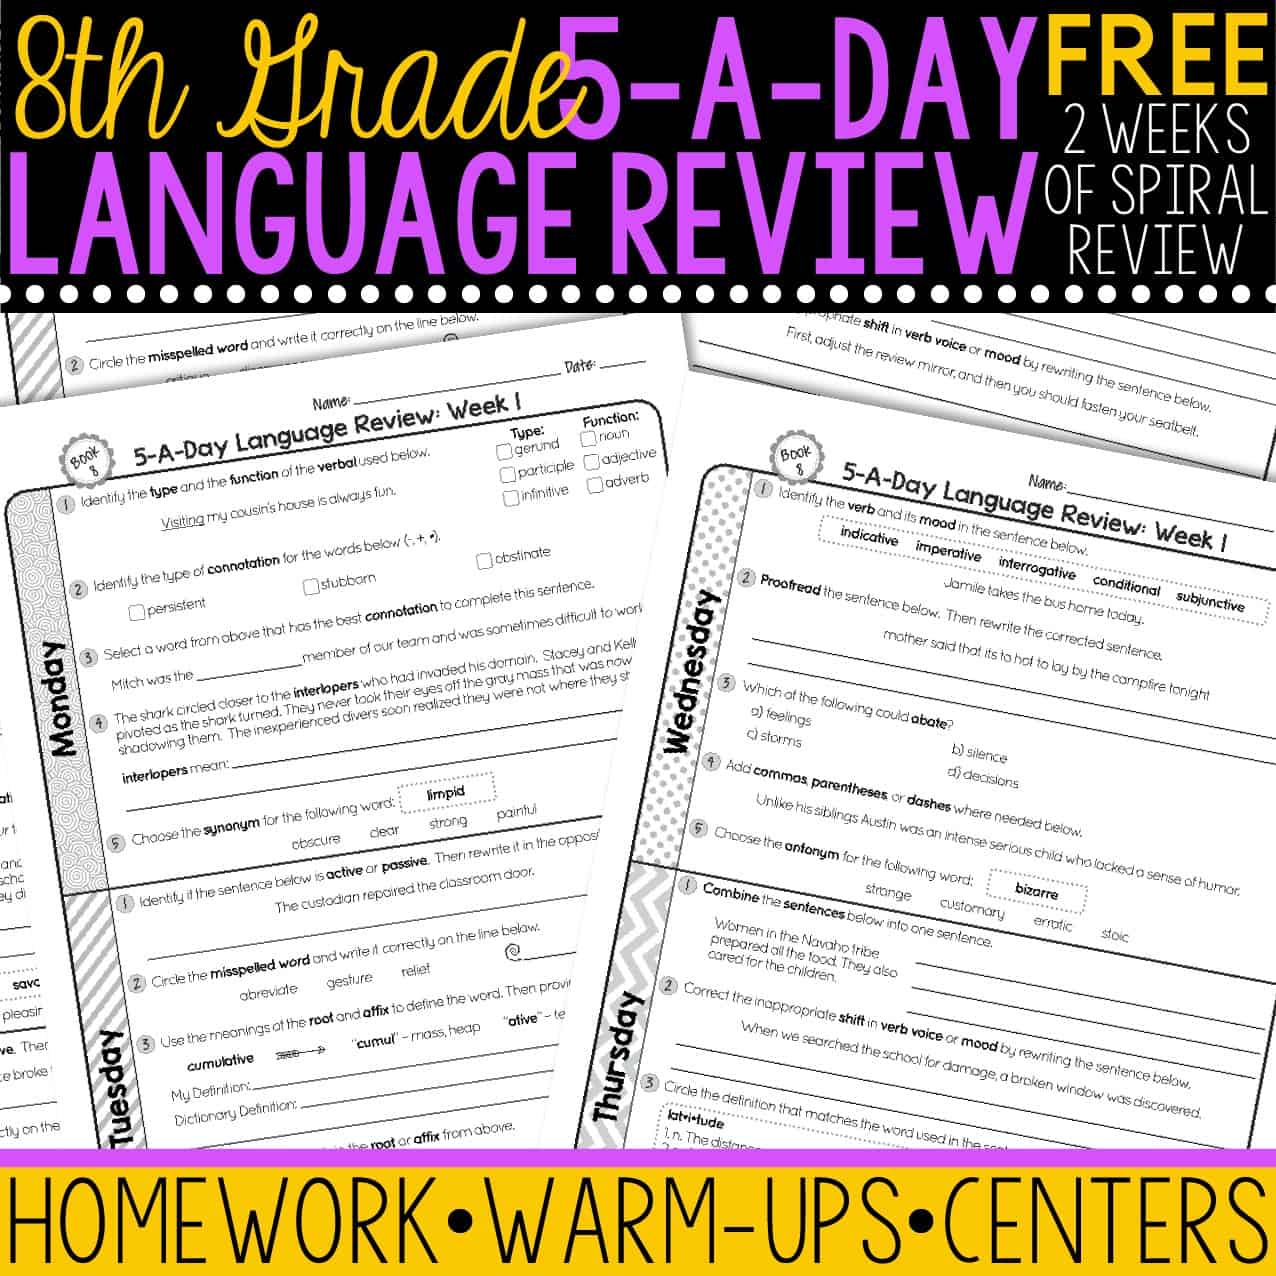 8th grade daily language review